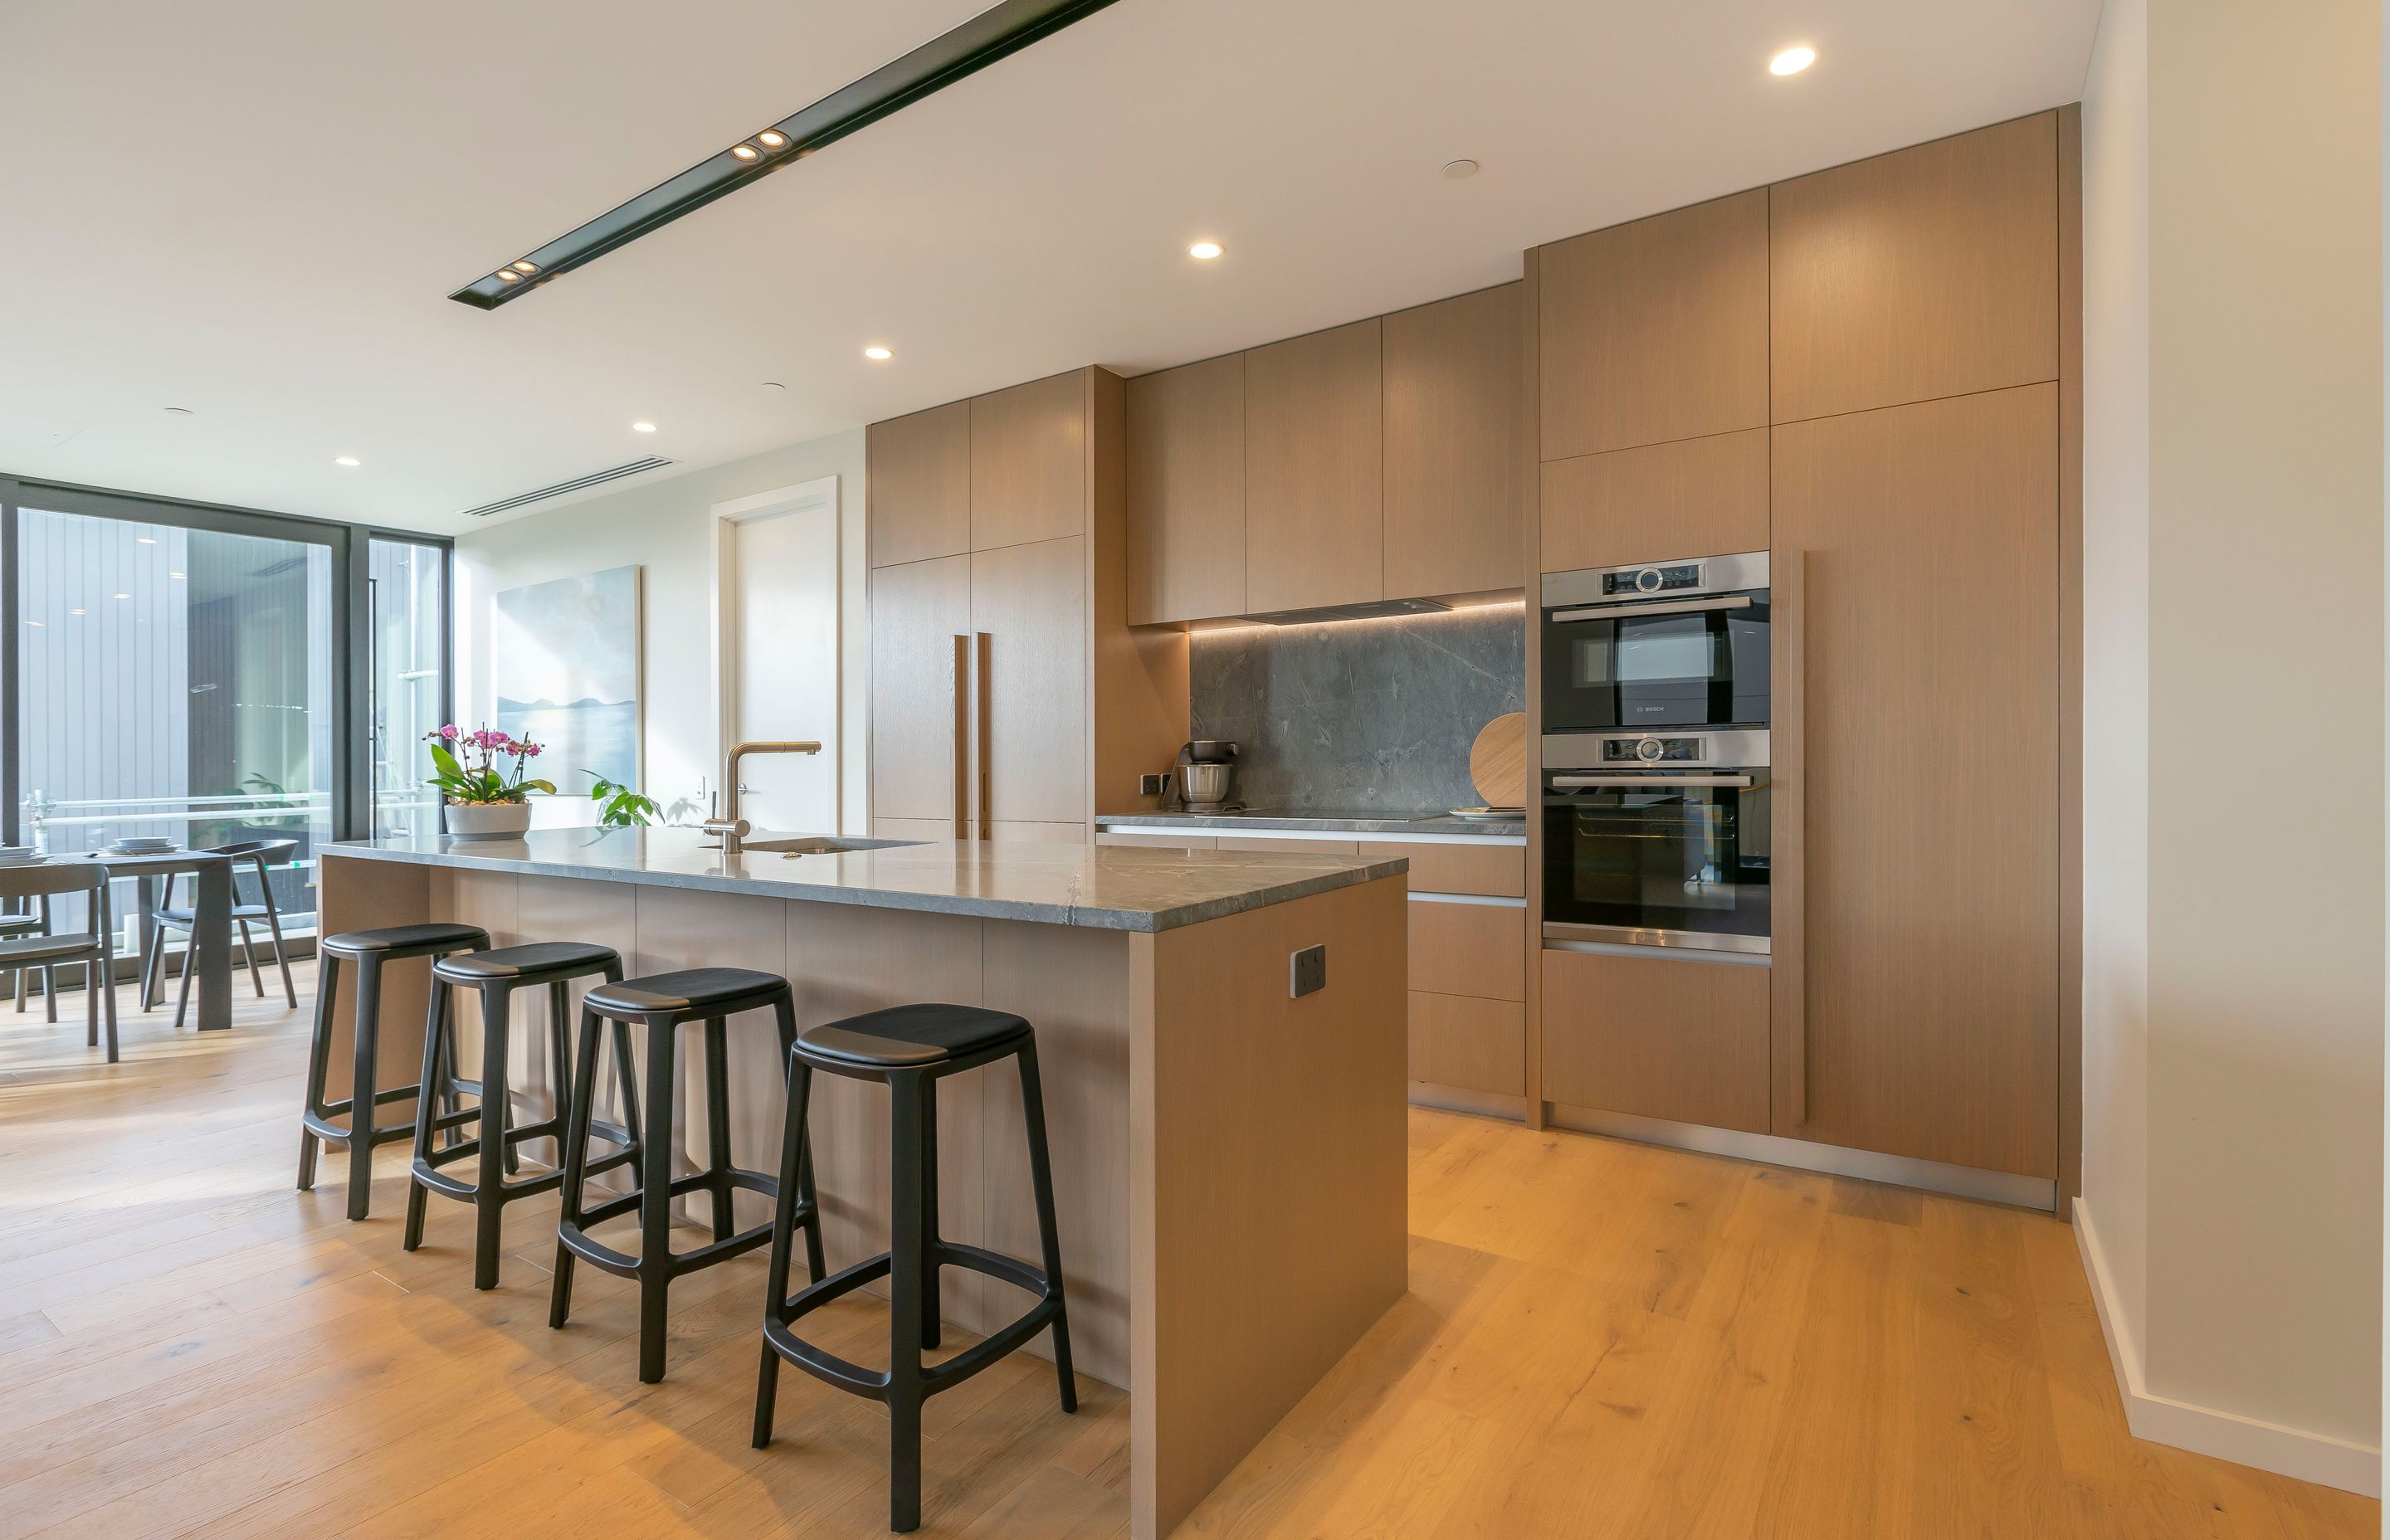 The interior material palette of the apartments is driven by a connection to the idea of Mission Bay and Kohimarama being beachside communities.  All kitchen cabinetry featured by Sharp and Page.  